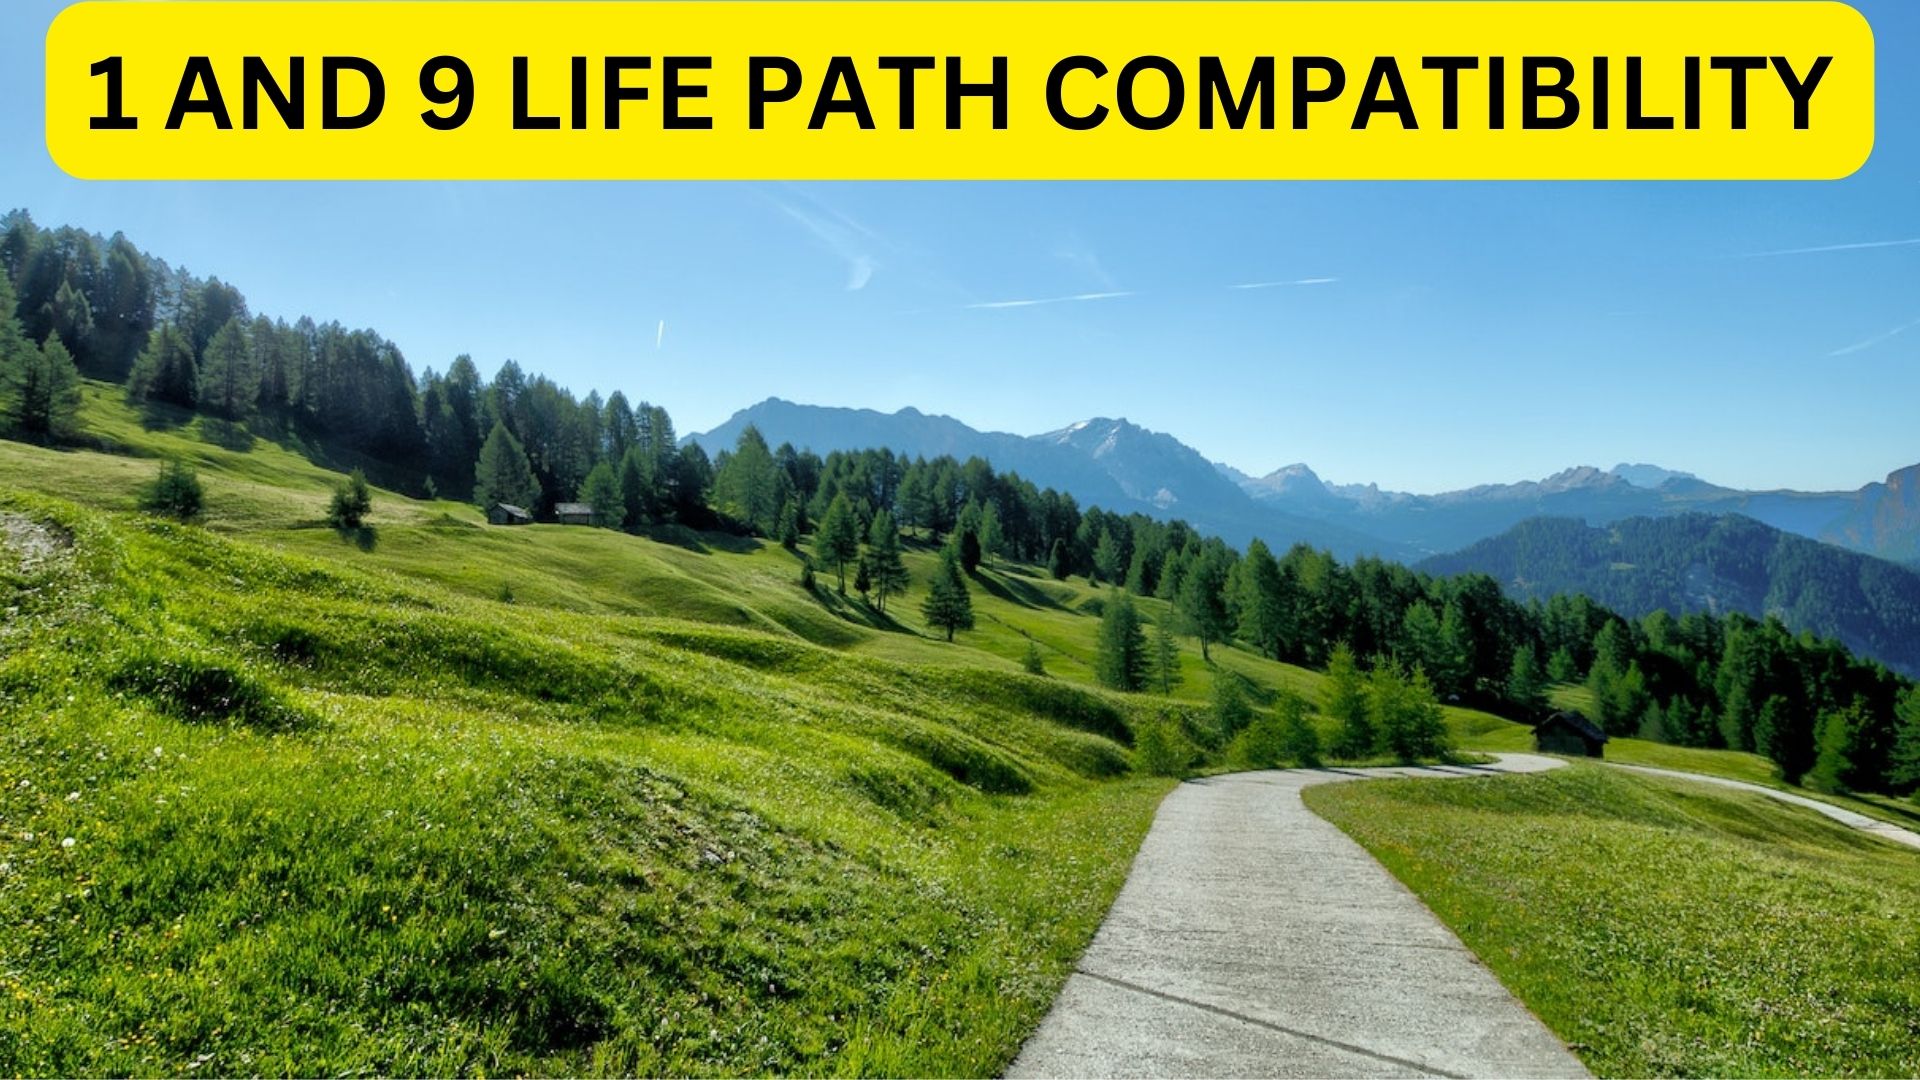 1 And 9 Life Path Compatibility - A Rock-solid Combination